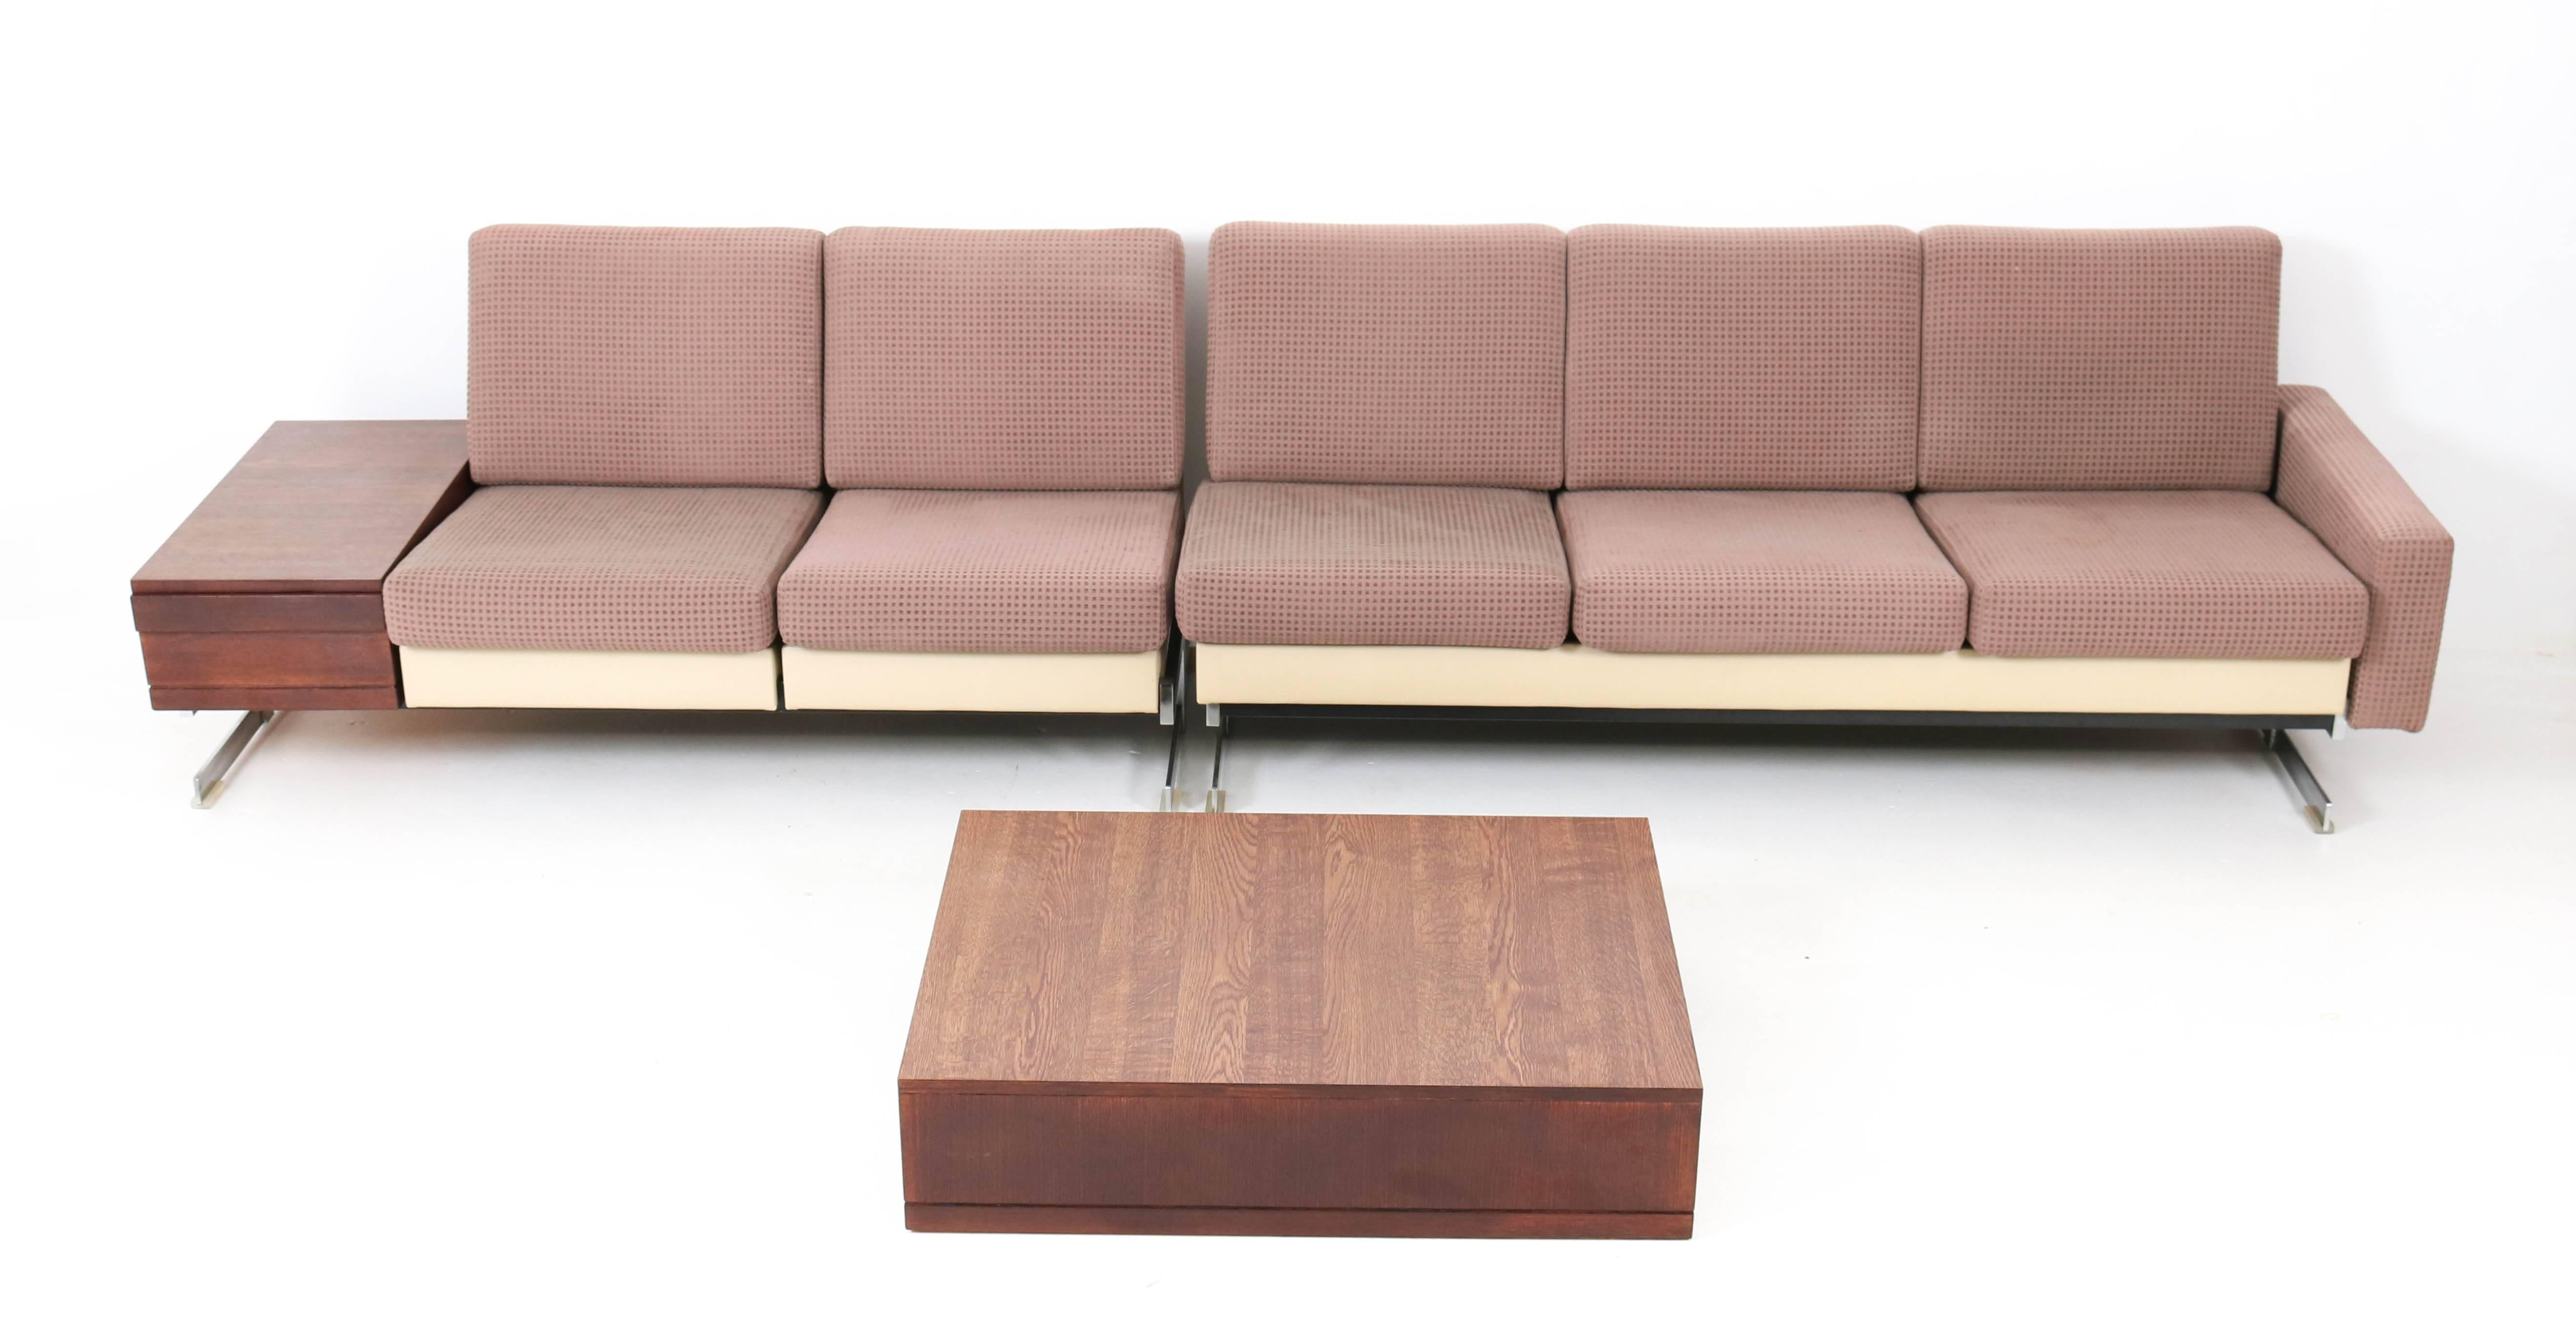 
Rare and hard to find Mid-Century Modern sofas with wenge coffee tables.
Design by Rolf Benz, Model: Pluraform.
Striking German design from the 1960s.
Original chrome-plated metal base and the seats have their original upholstery which is used